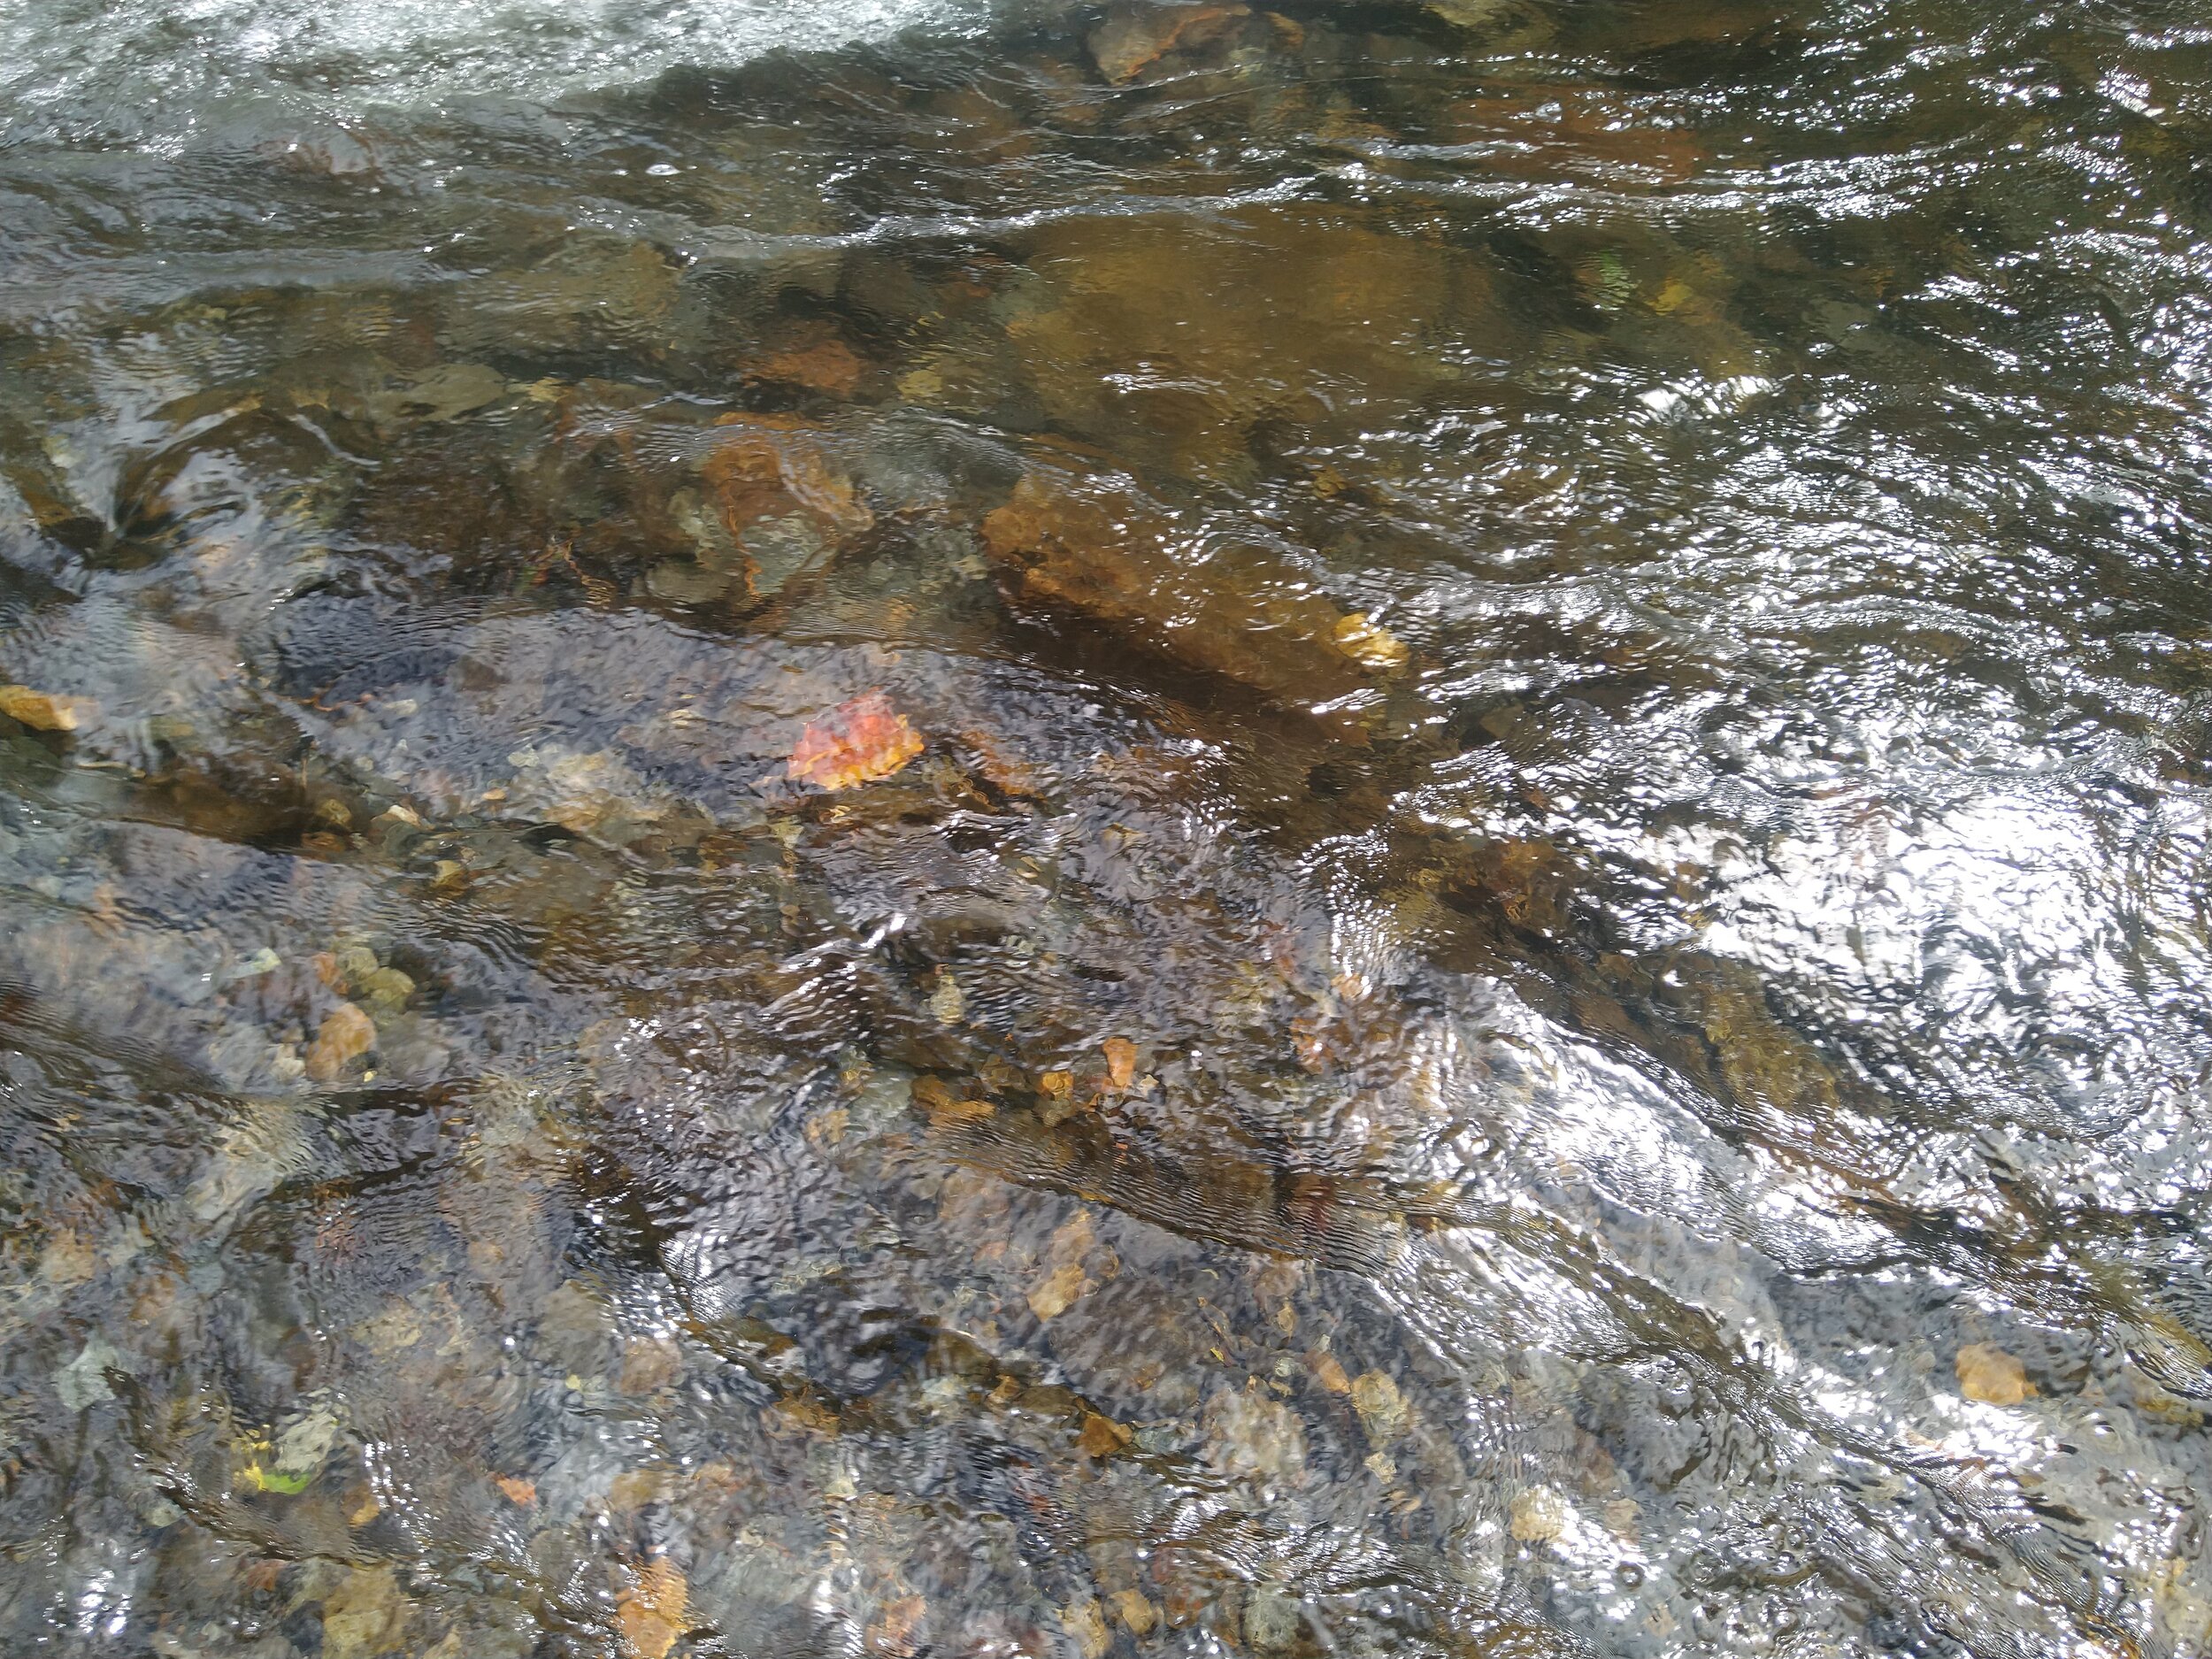 The crystal clear water of the Chontal River